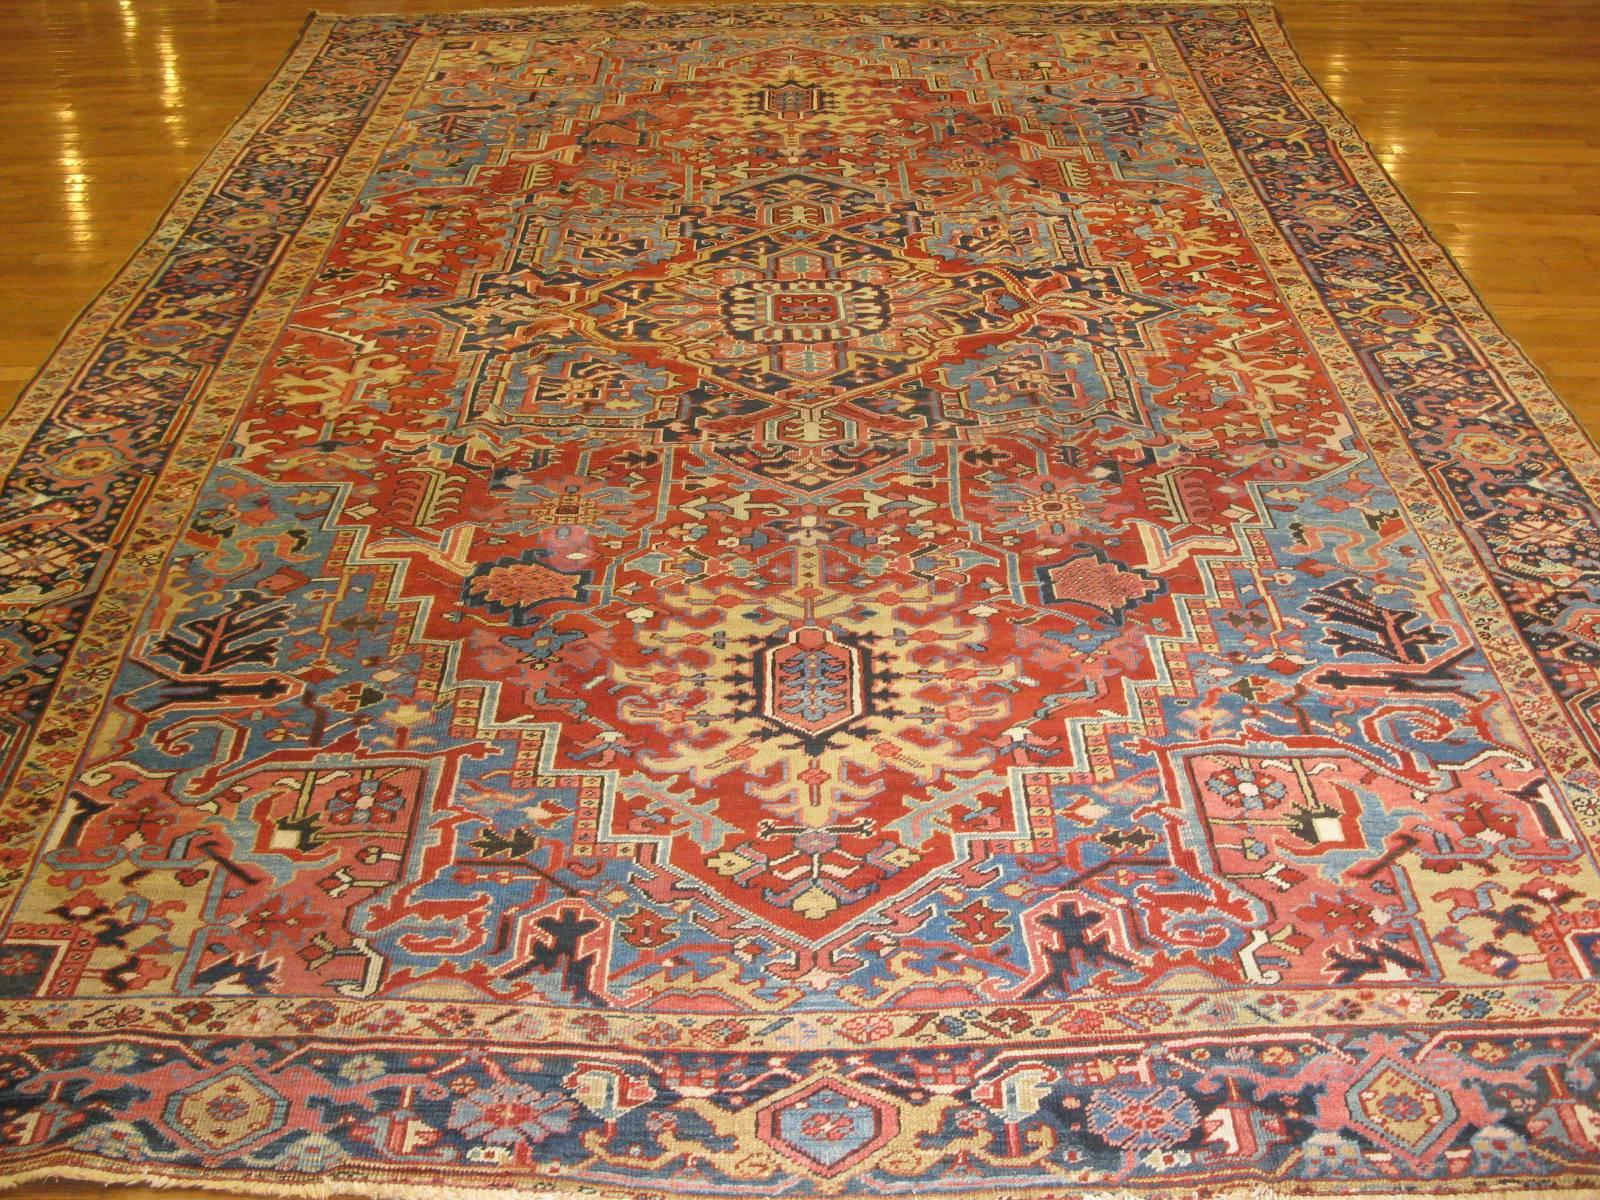 This is a beautiful and finely hand-knotted antique Persian Heriz rug. It is made with wool colored with natural dyes that has softened with age. The rug measures 9' x 13' and in great condition.